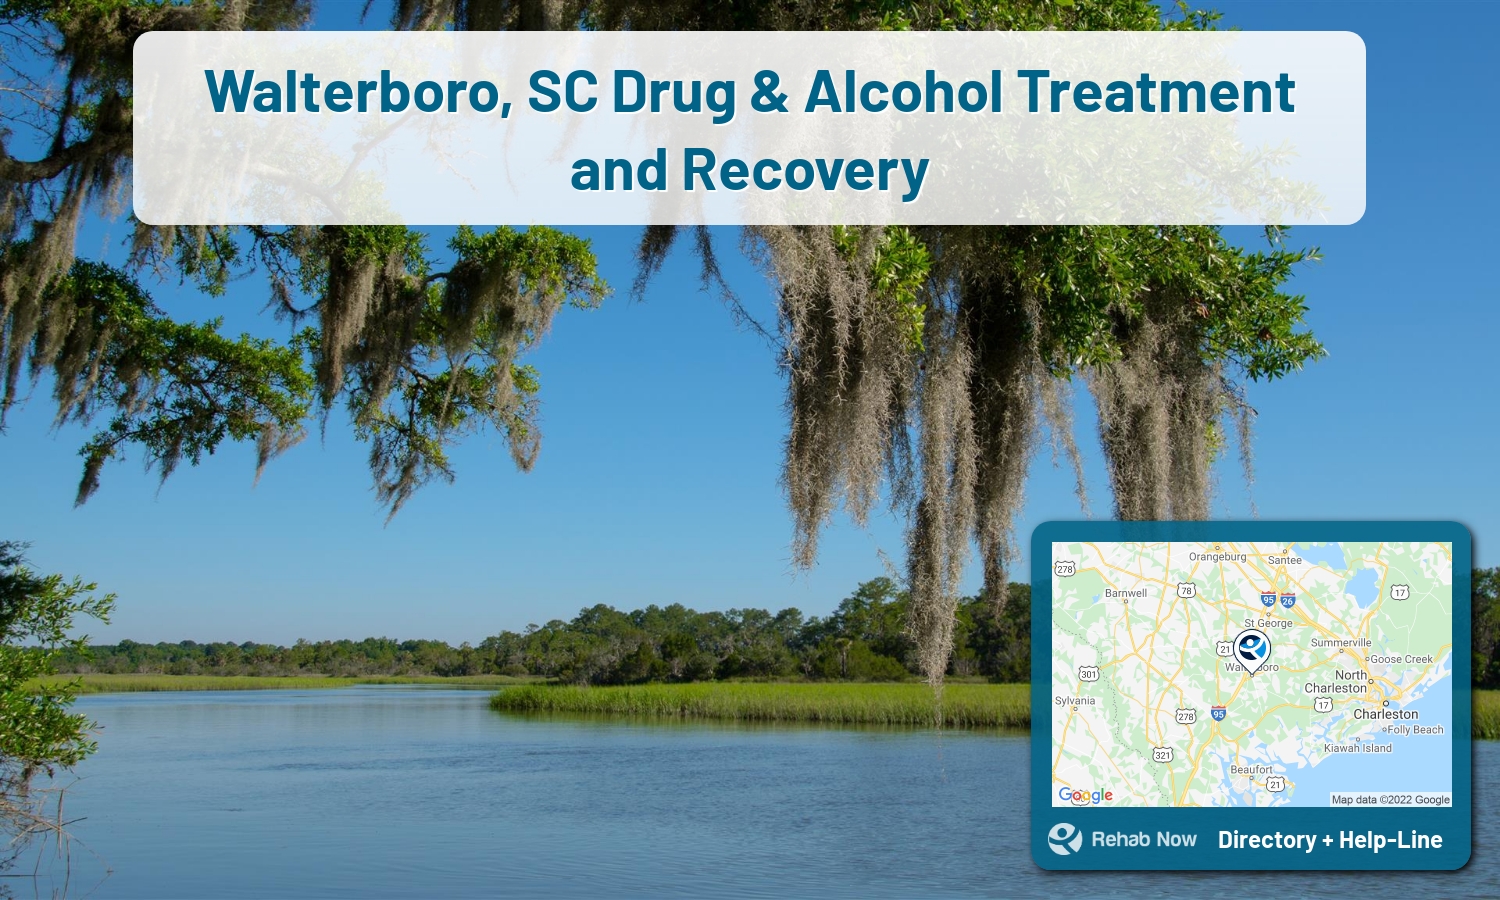 Drug rehab and alcohol treatment services nearby Walterboro, SC. Need help choosing a treatment program? Call our free hotline!